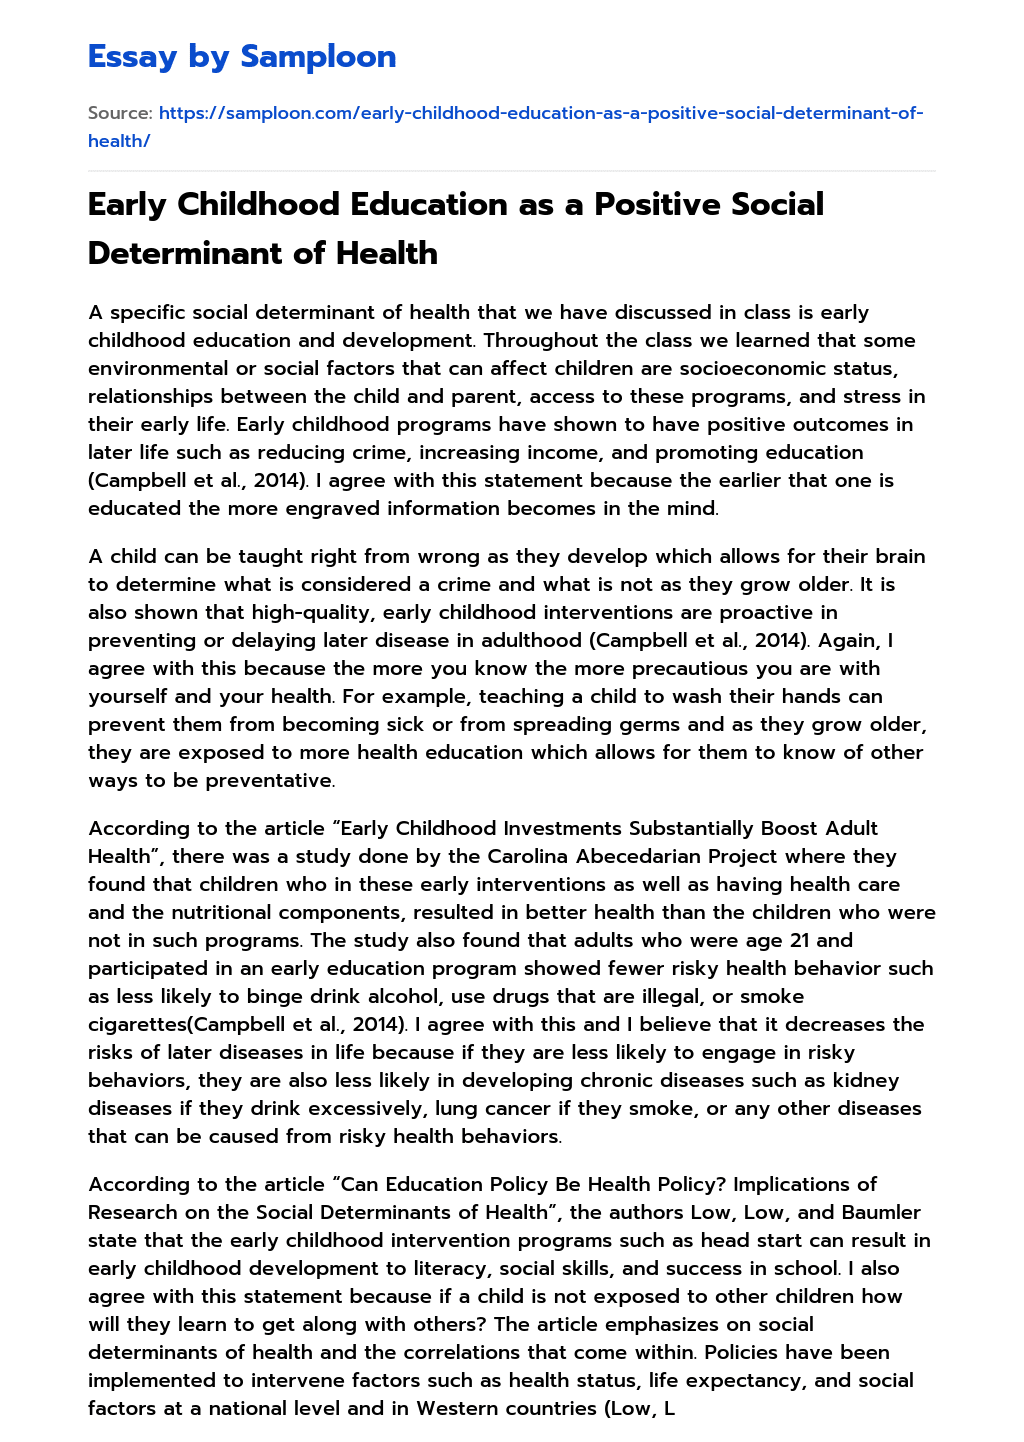 Early Childhood Education as a Positive Social Determinant of Health essay